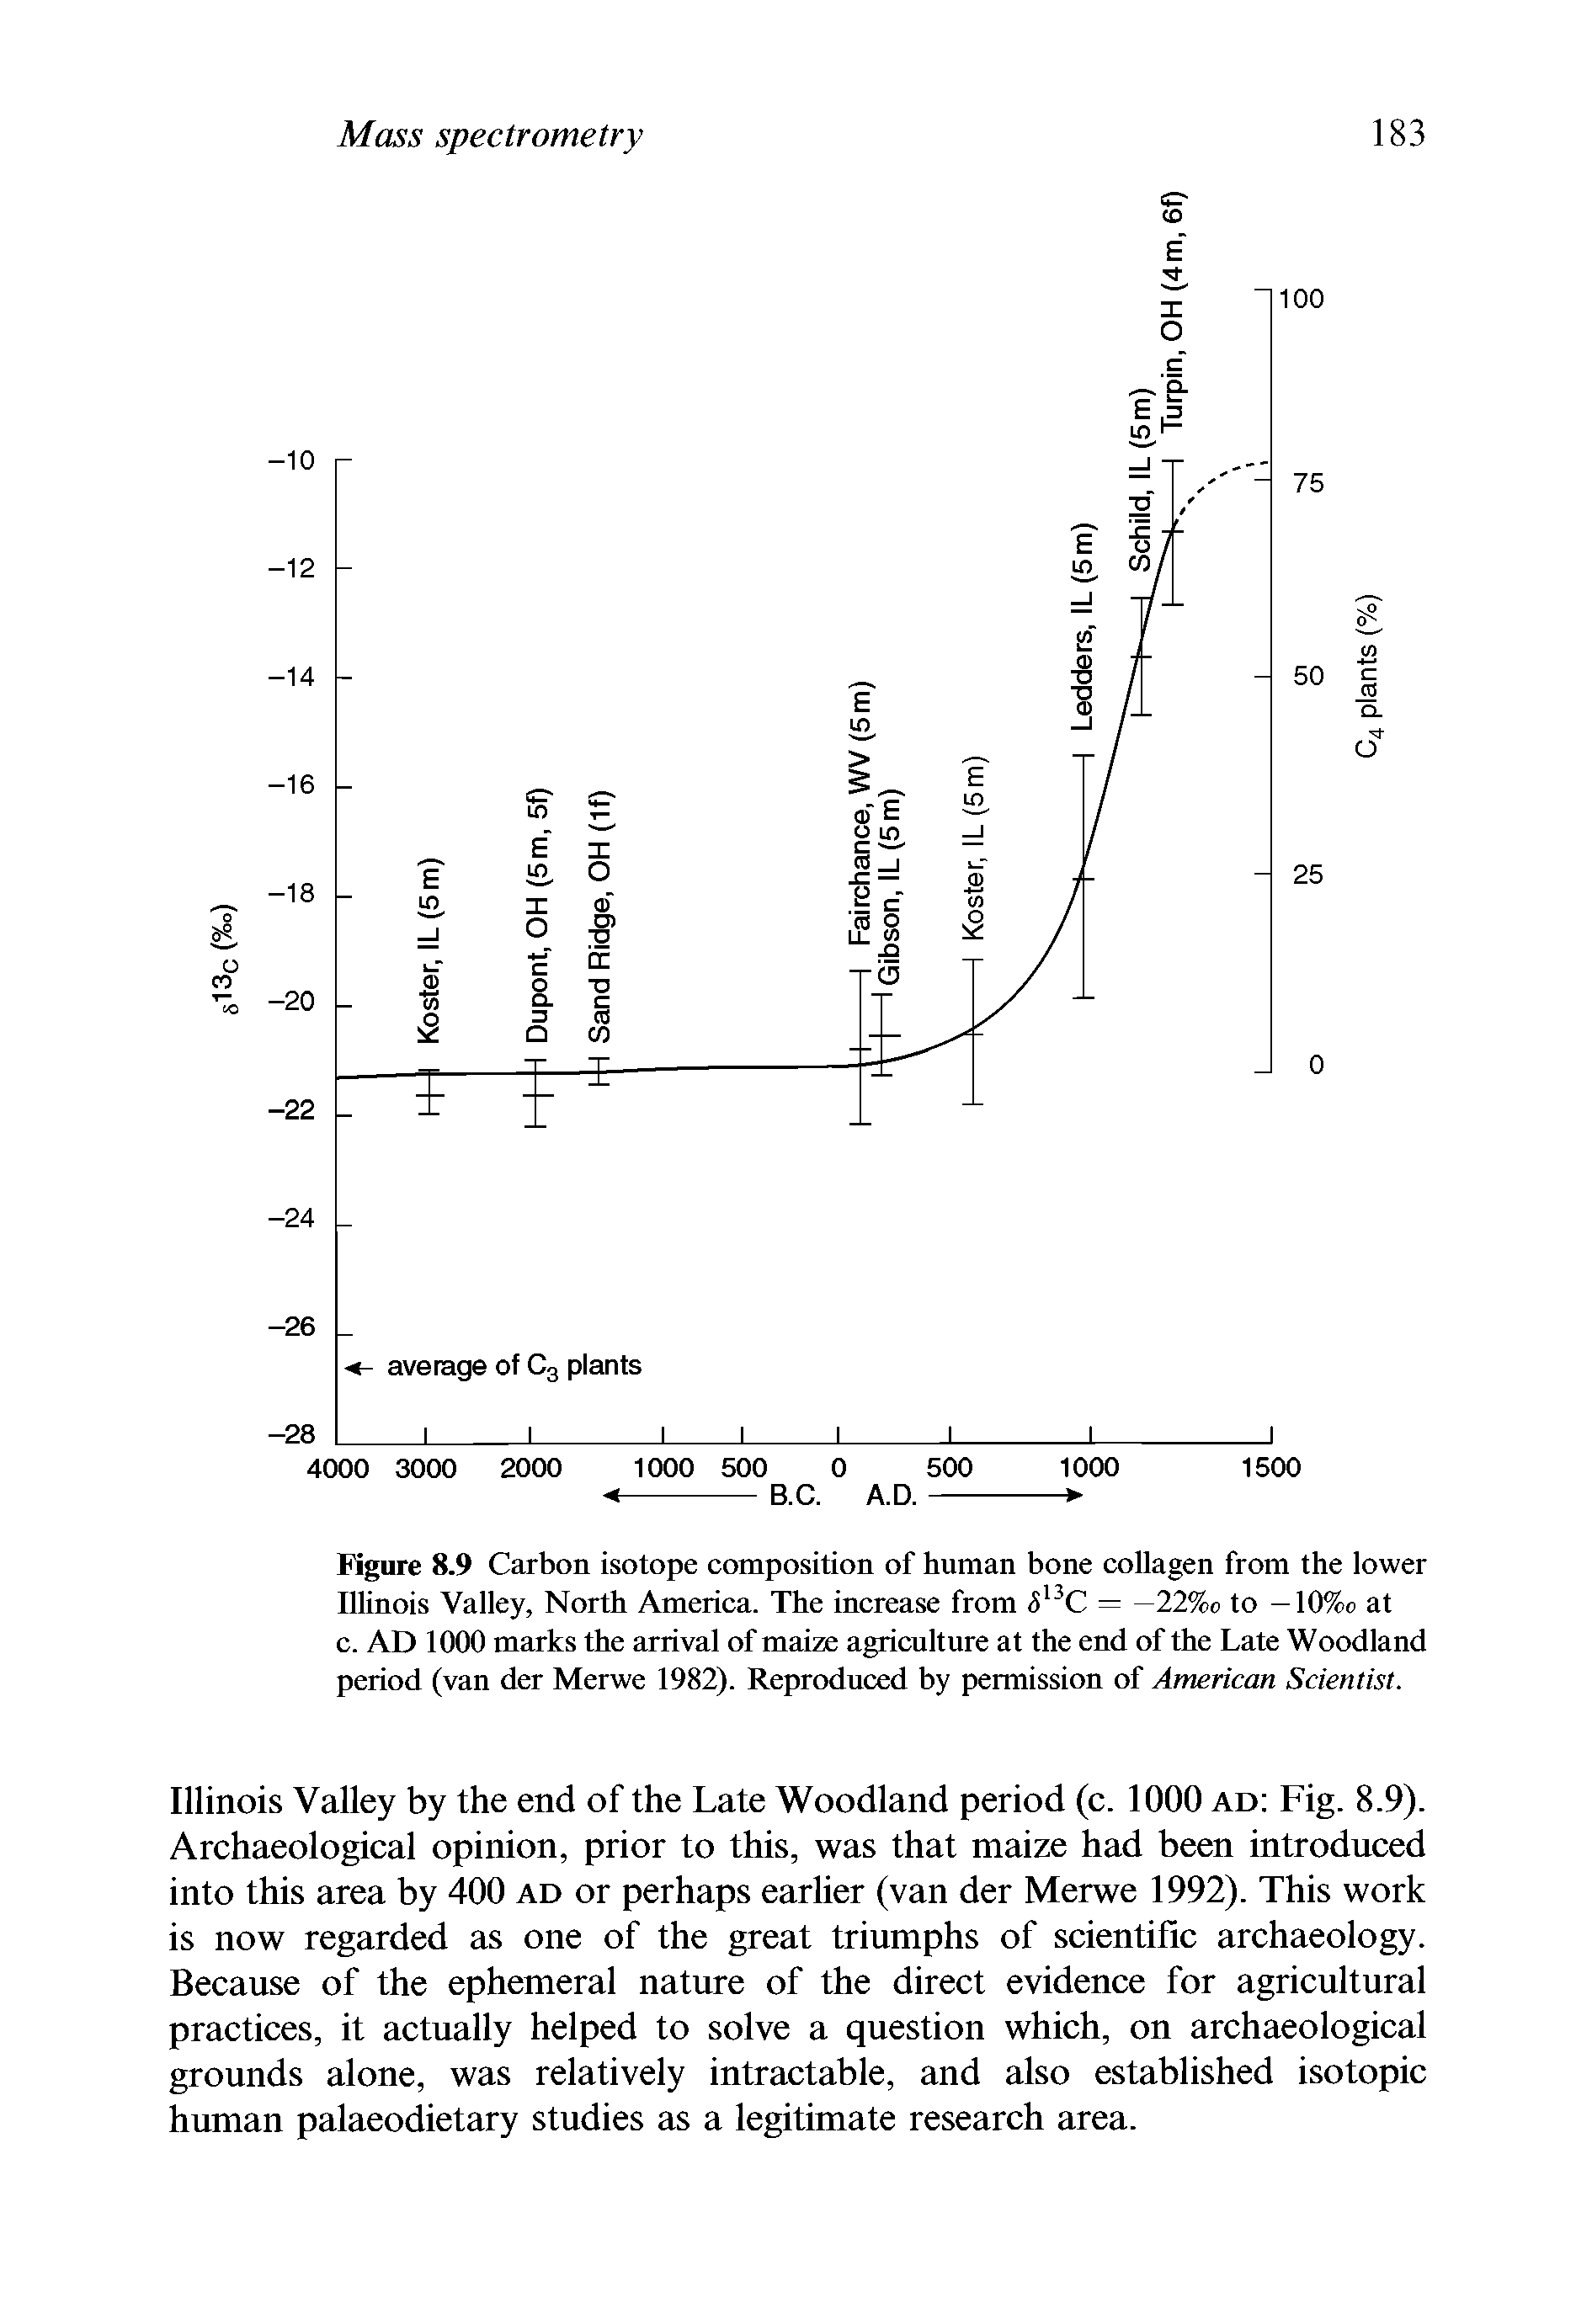 Figure 8.9 Carbon isotope composition of human bone collagen from the lower Illinois Valley, North America. The increase from <513C = —22%0 to —10%o at c. AD 1000 marks the arrival of maize agriculture at the end of the Late Woodland period (van der Merwe 1982). Reproduced by permission of American Scientist.